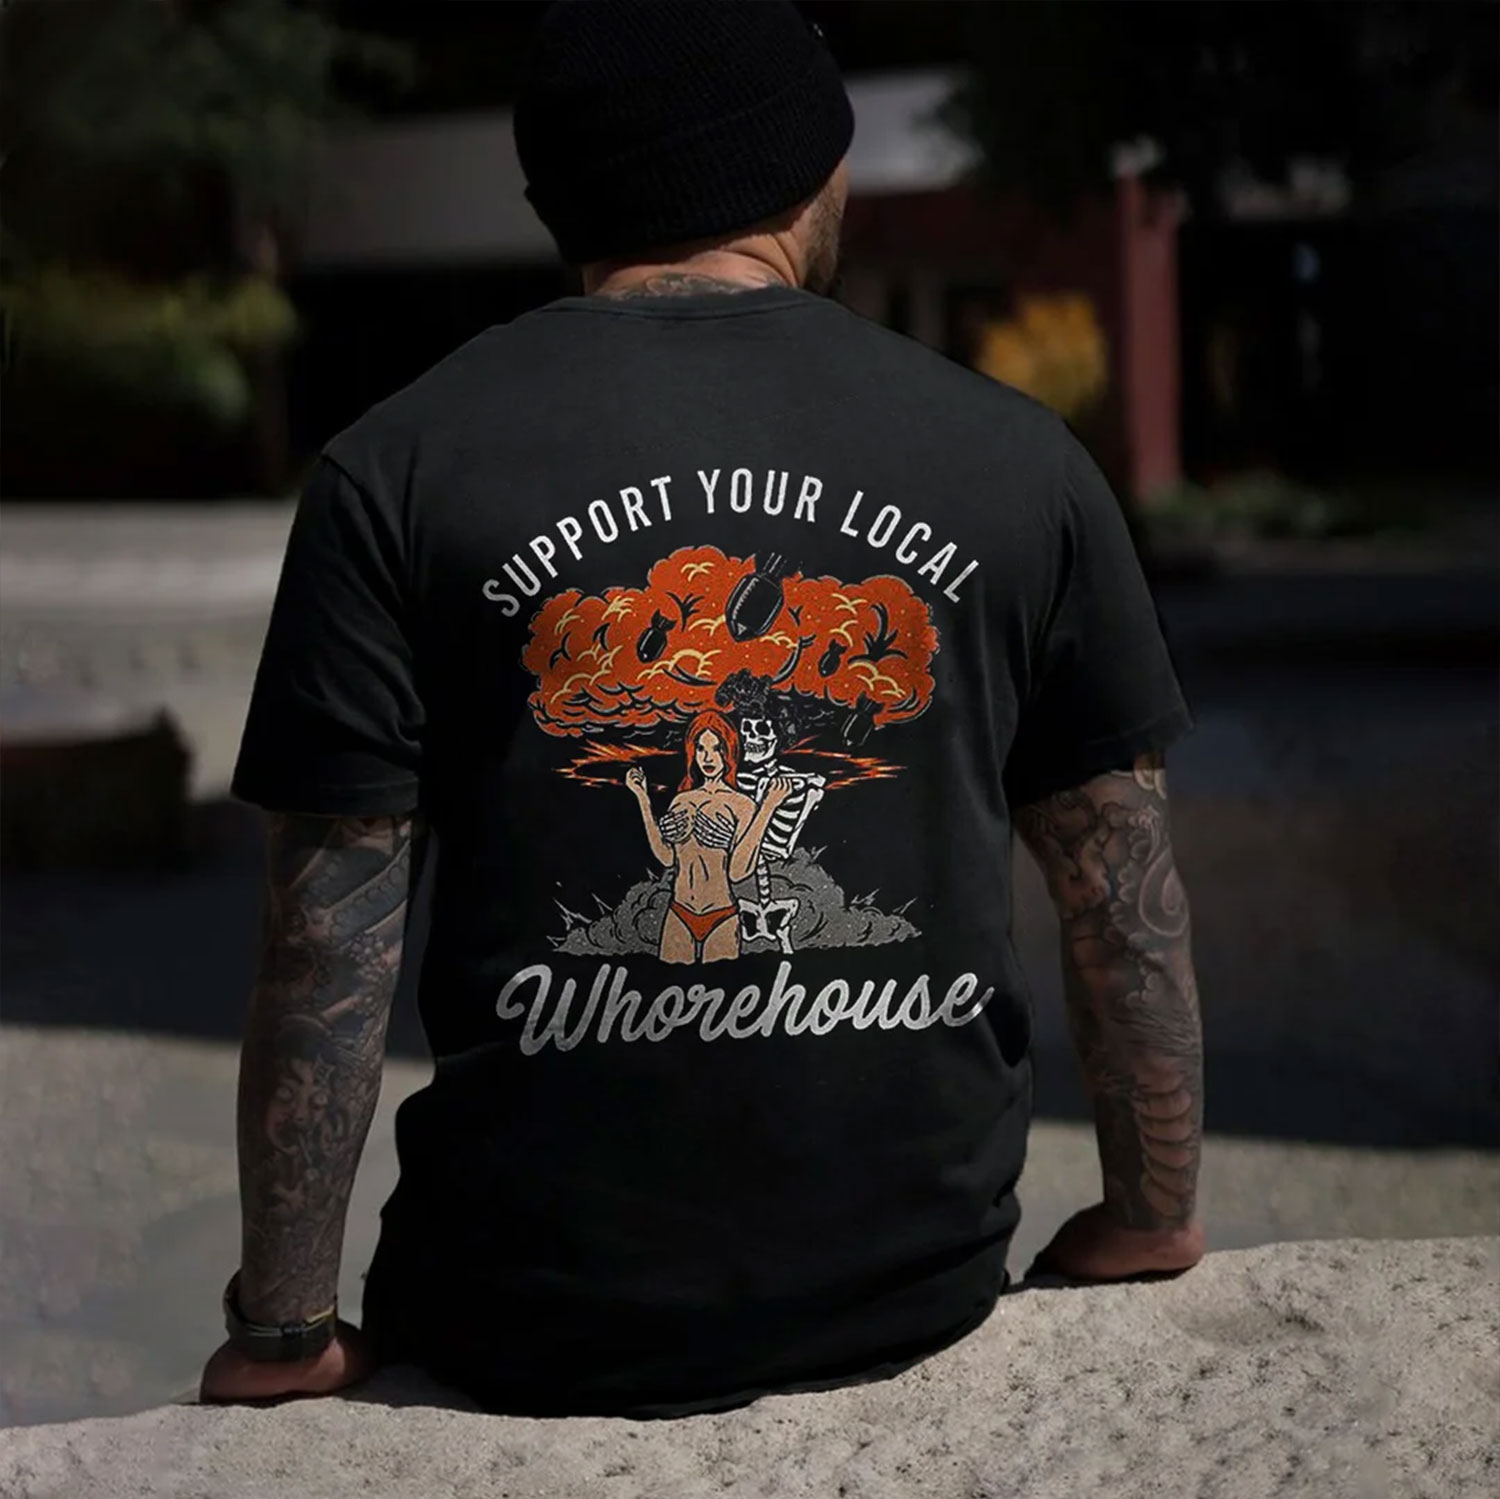 SUPPORT YOUR LOCAL Whorehouse Flirt Graphic Black Print T-shirt